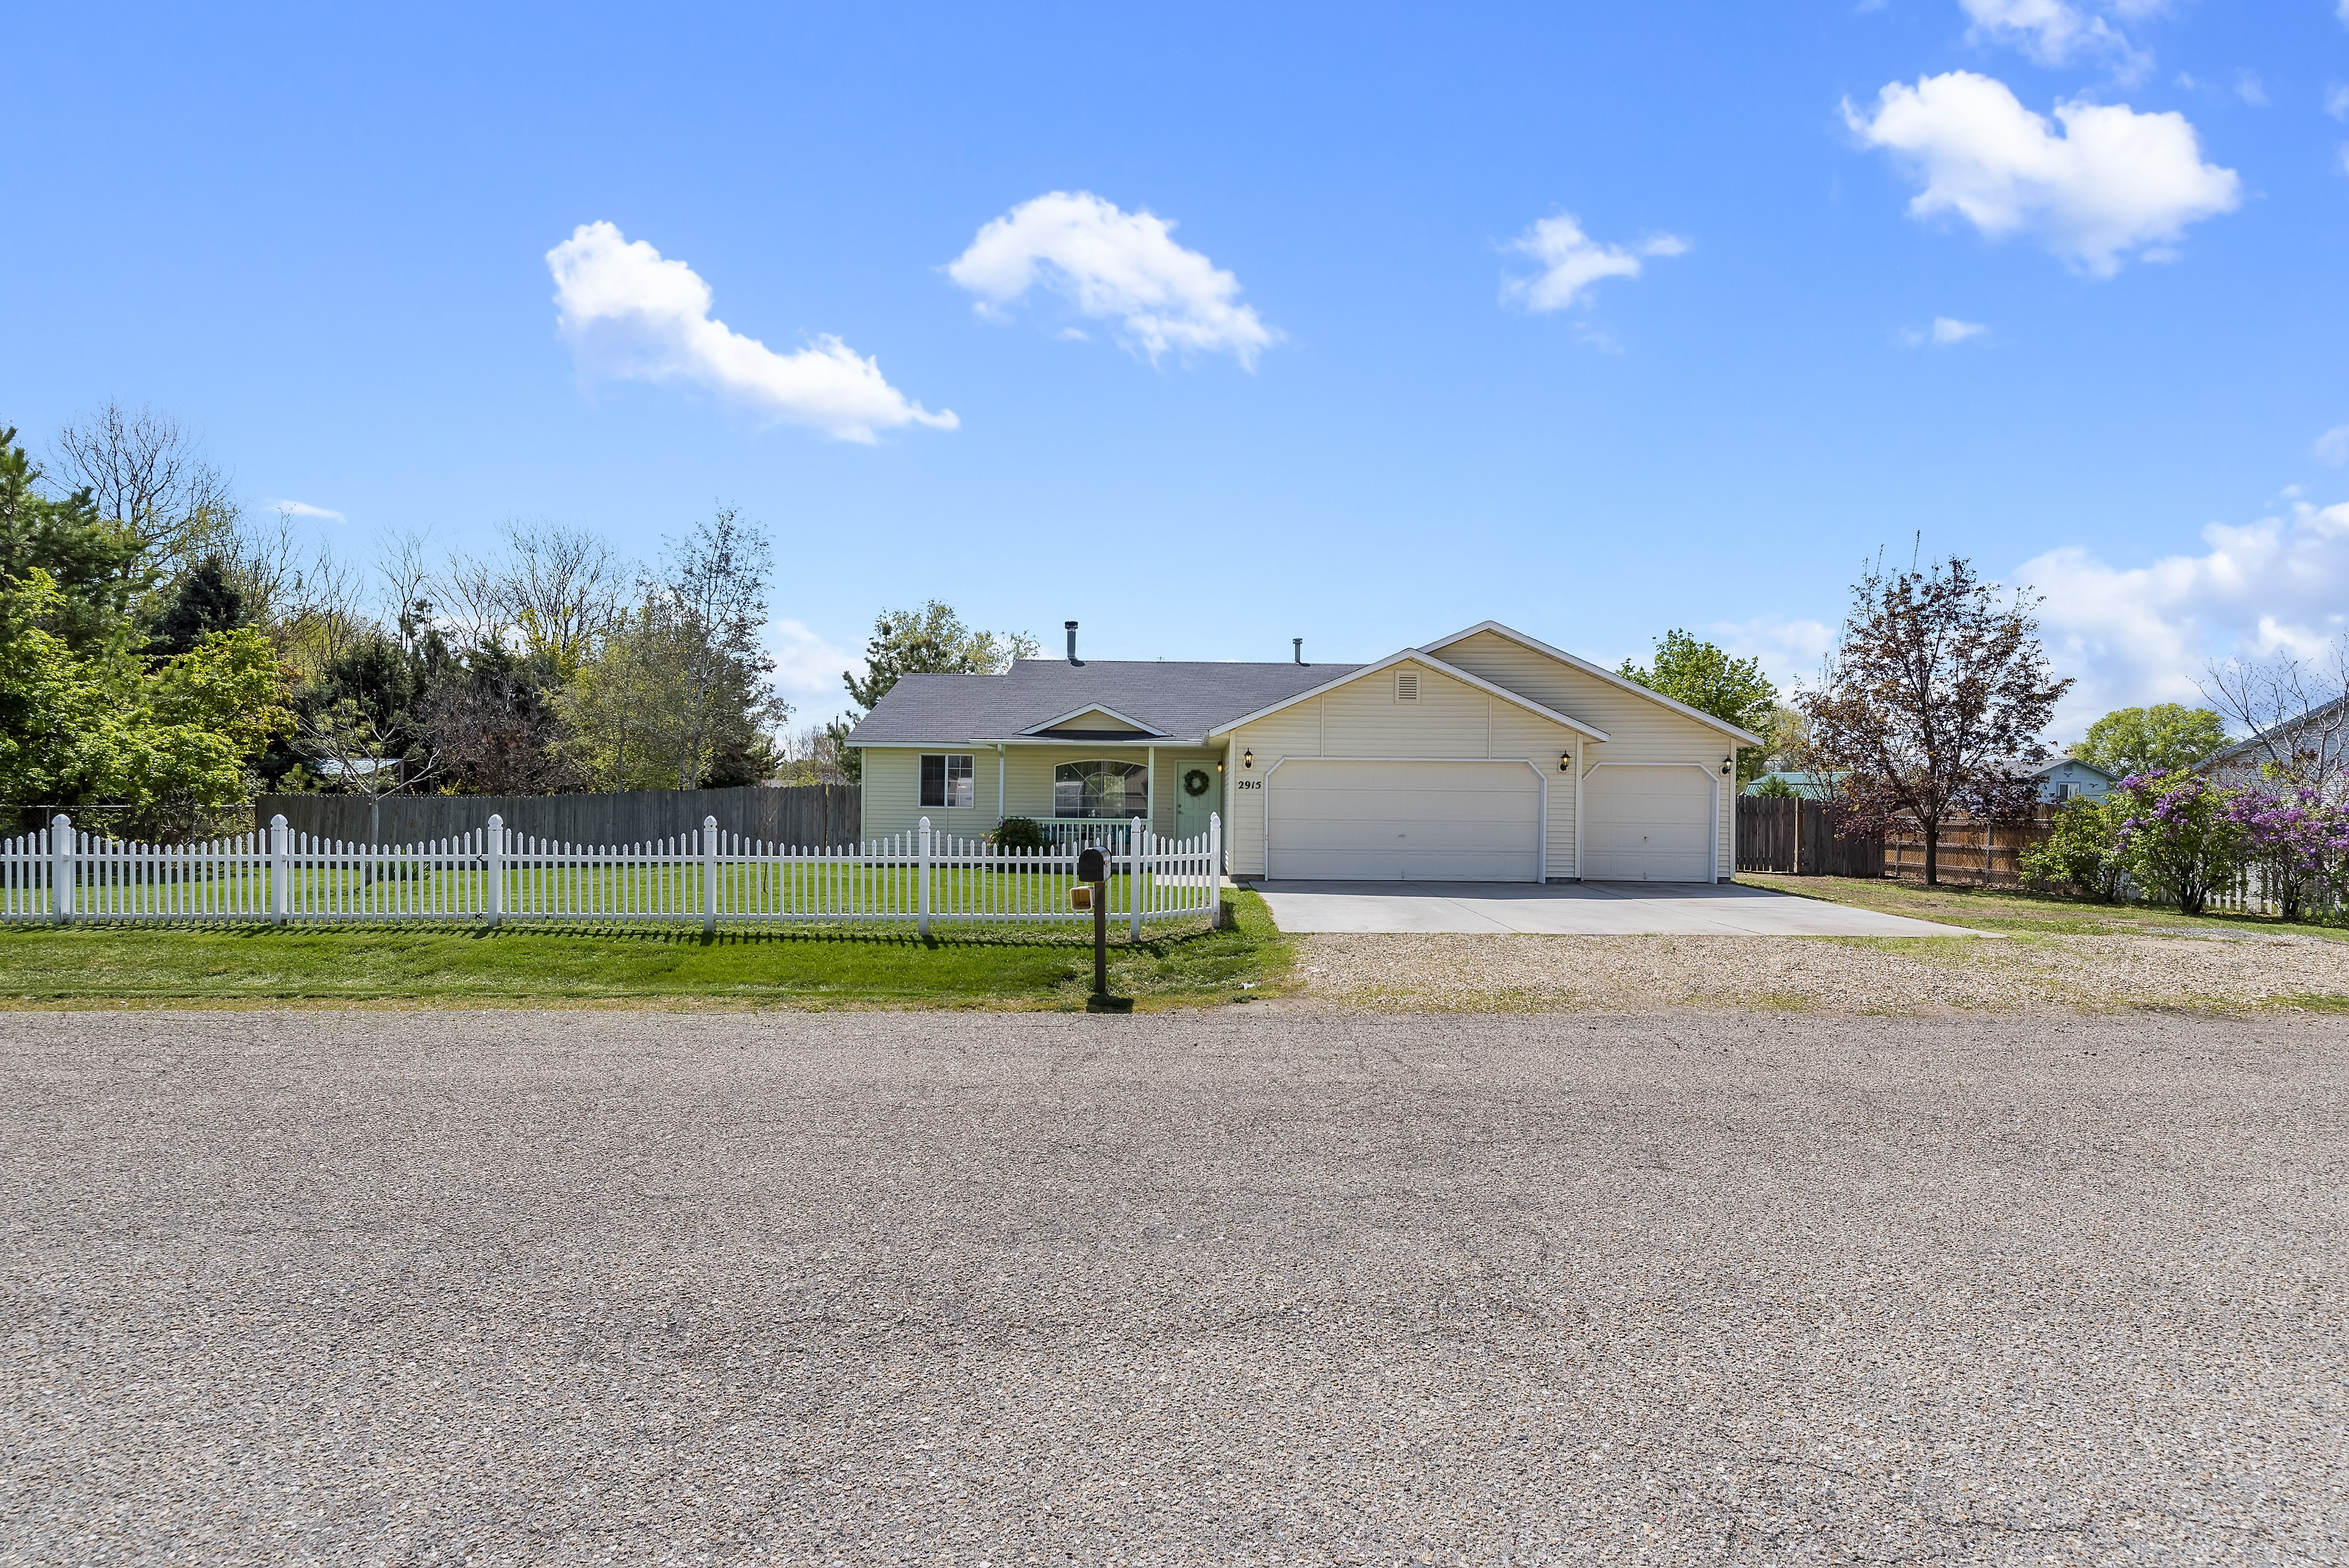 TWO HOMES NOW SOLD in Nampa IDAHO - Close to Parks